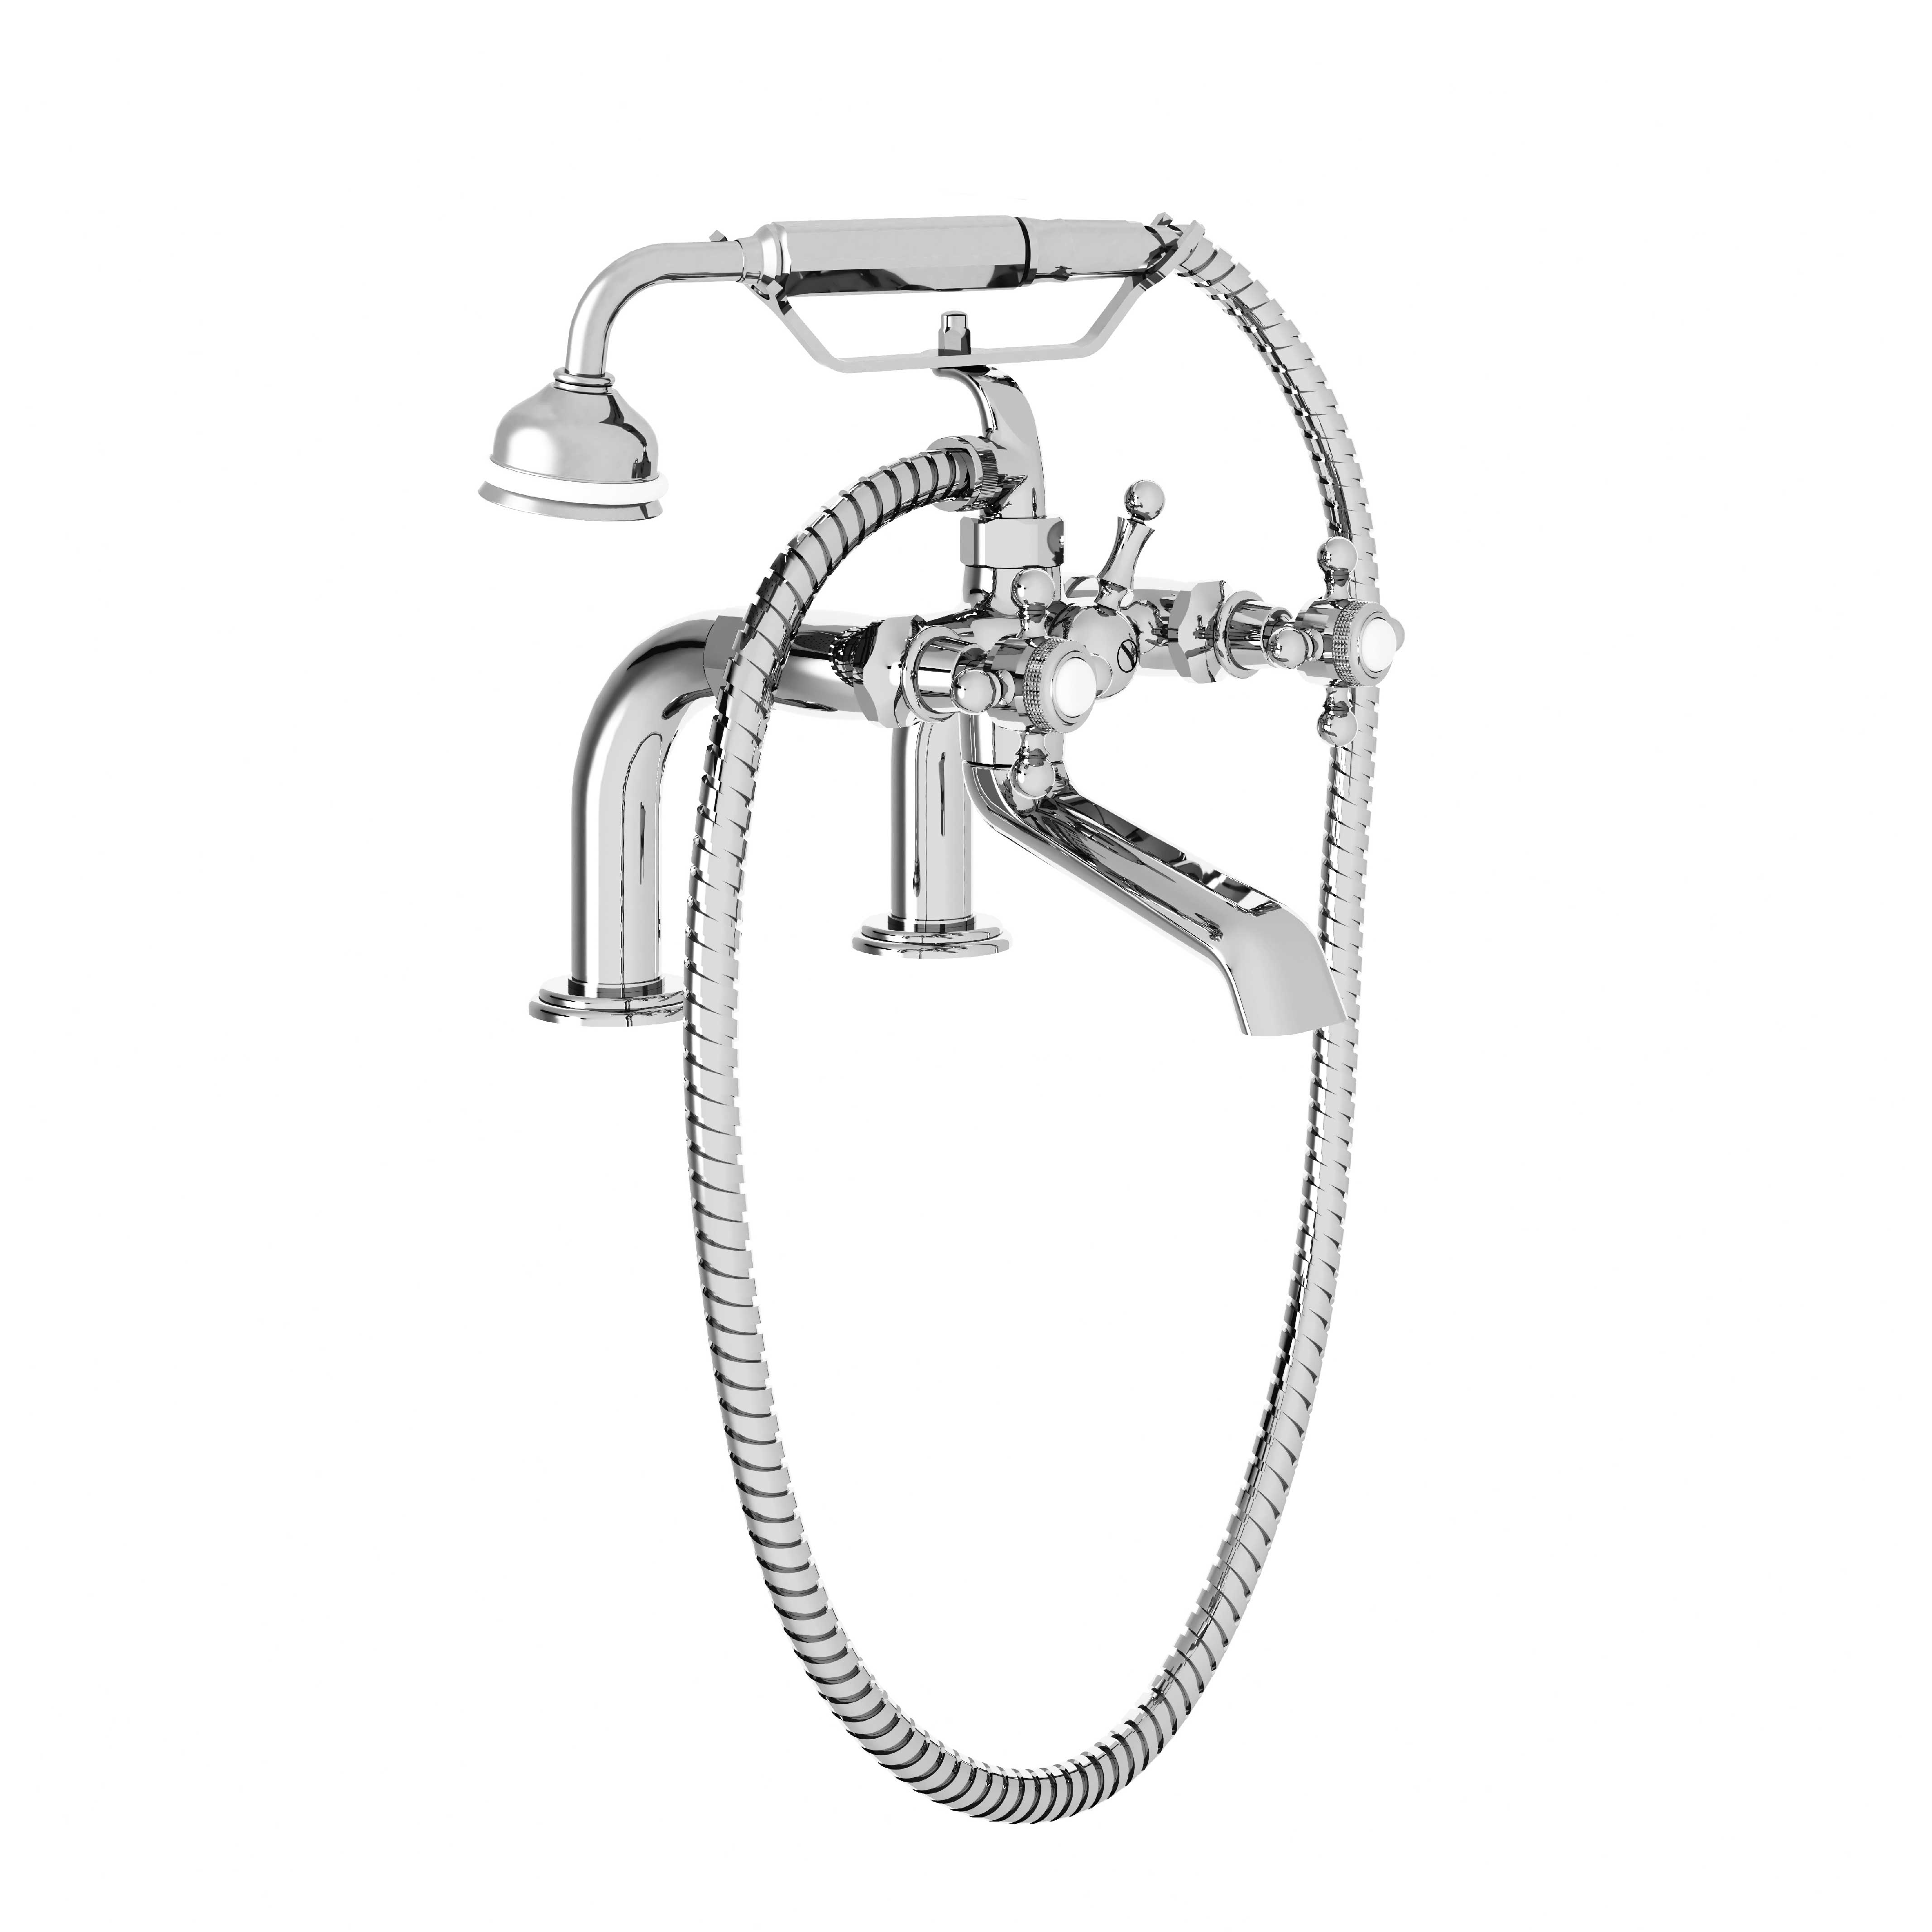 M30-3306 Rim mounted bath and shower mixer